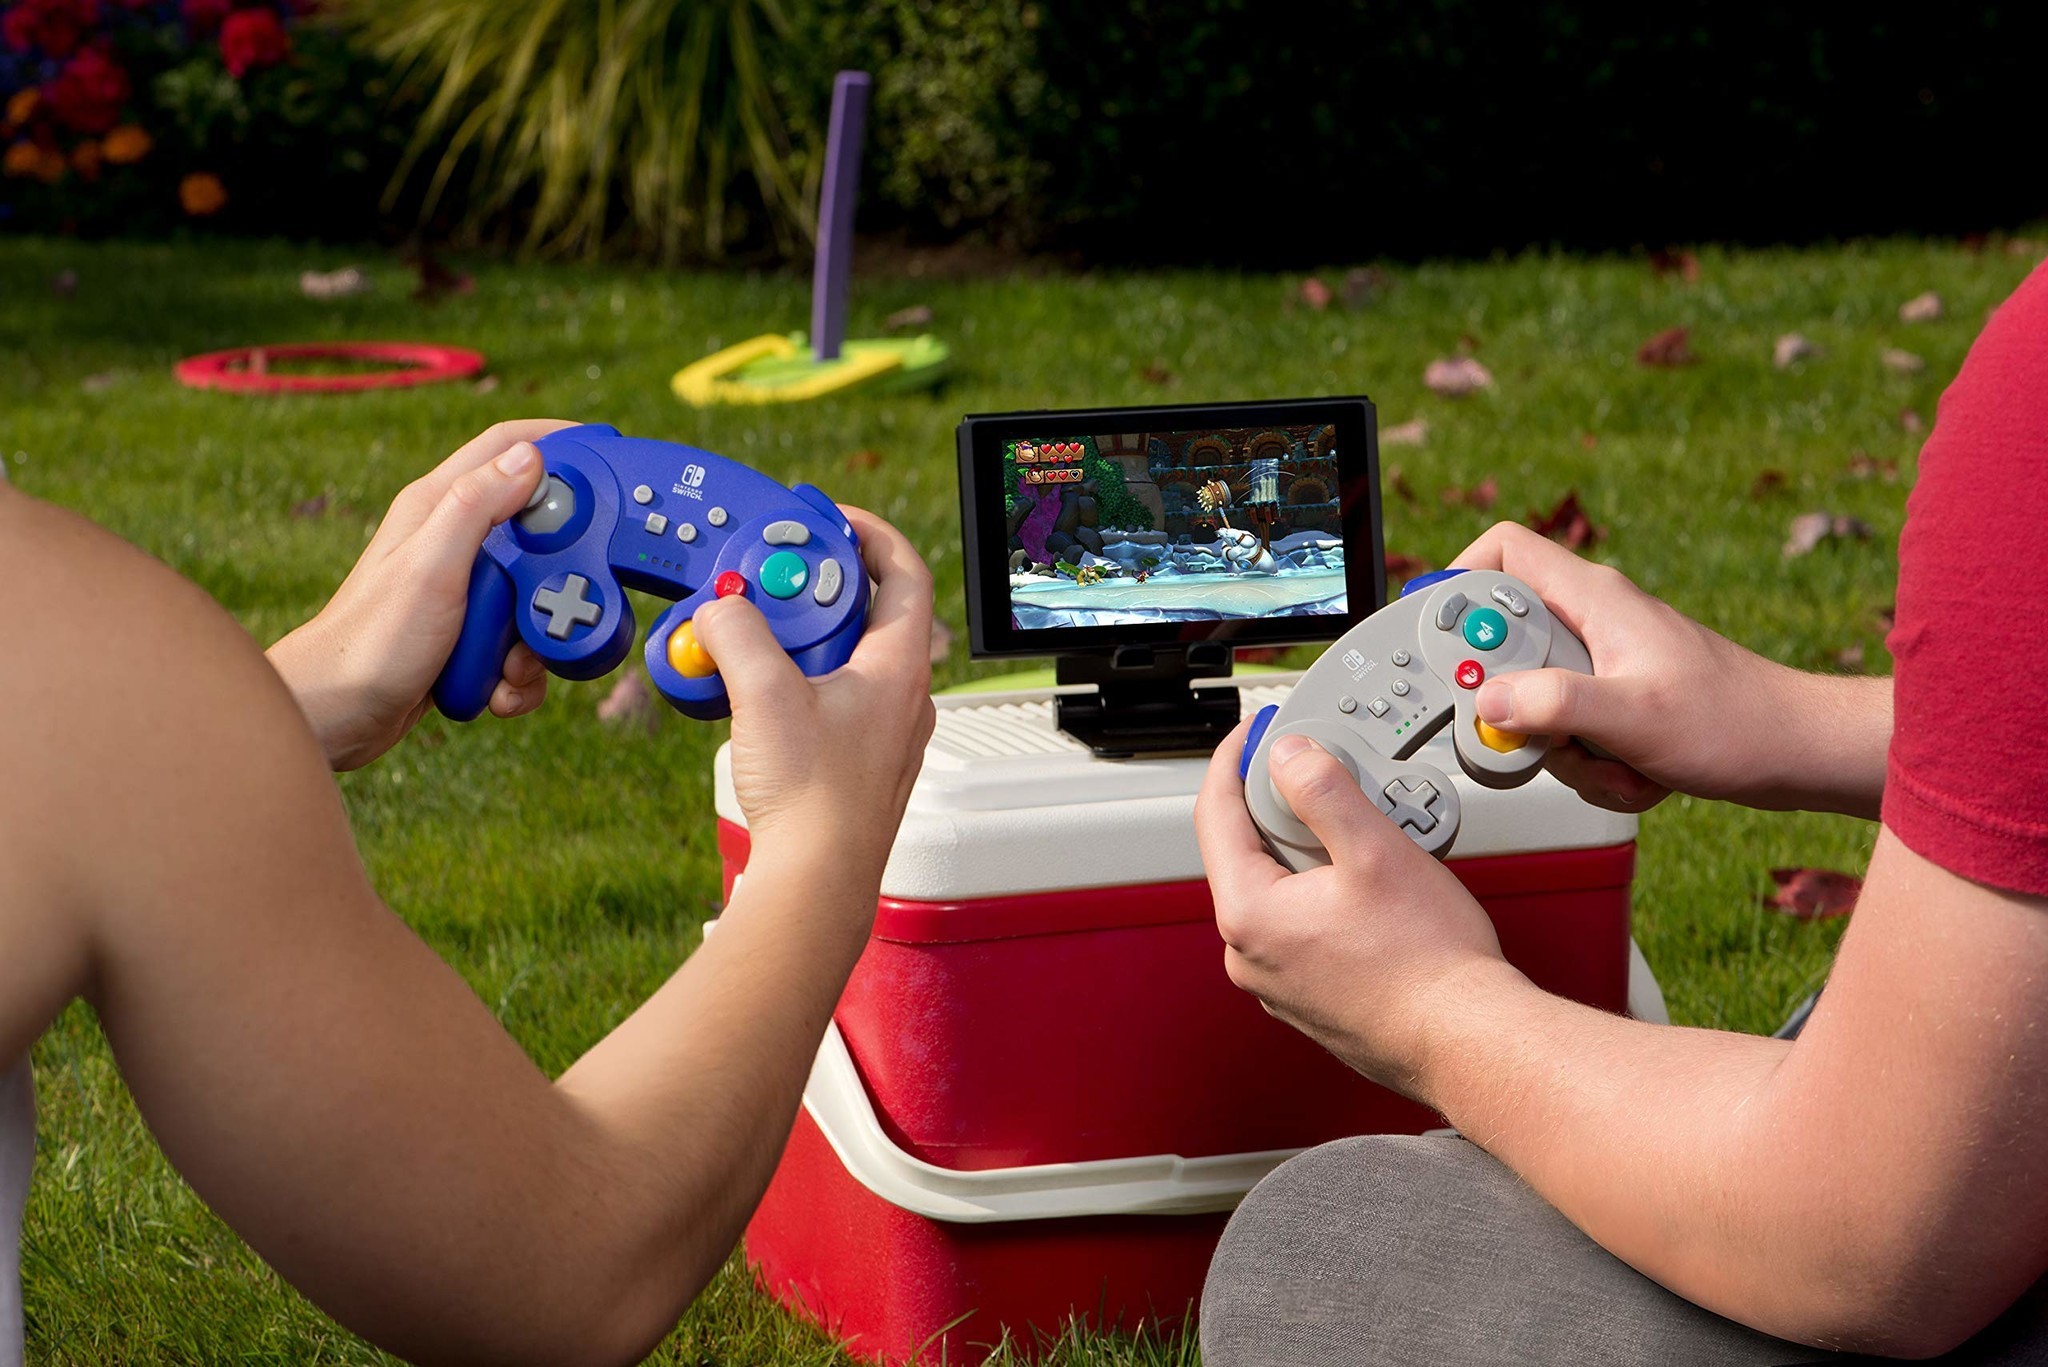 PowerA GameCube controllers shown in use with Nintendo Switch